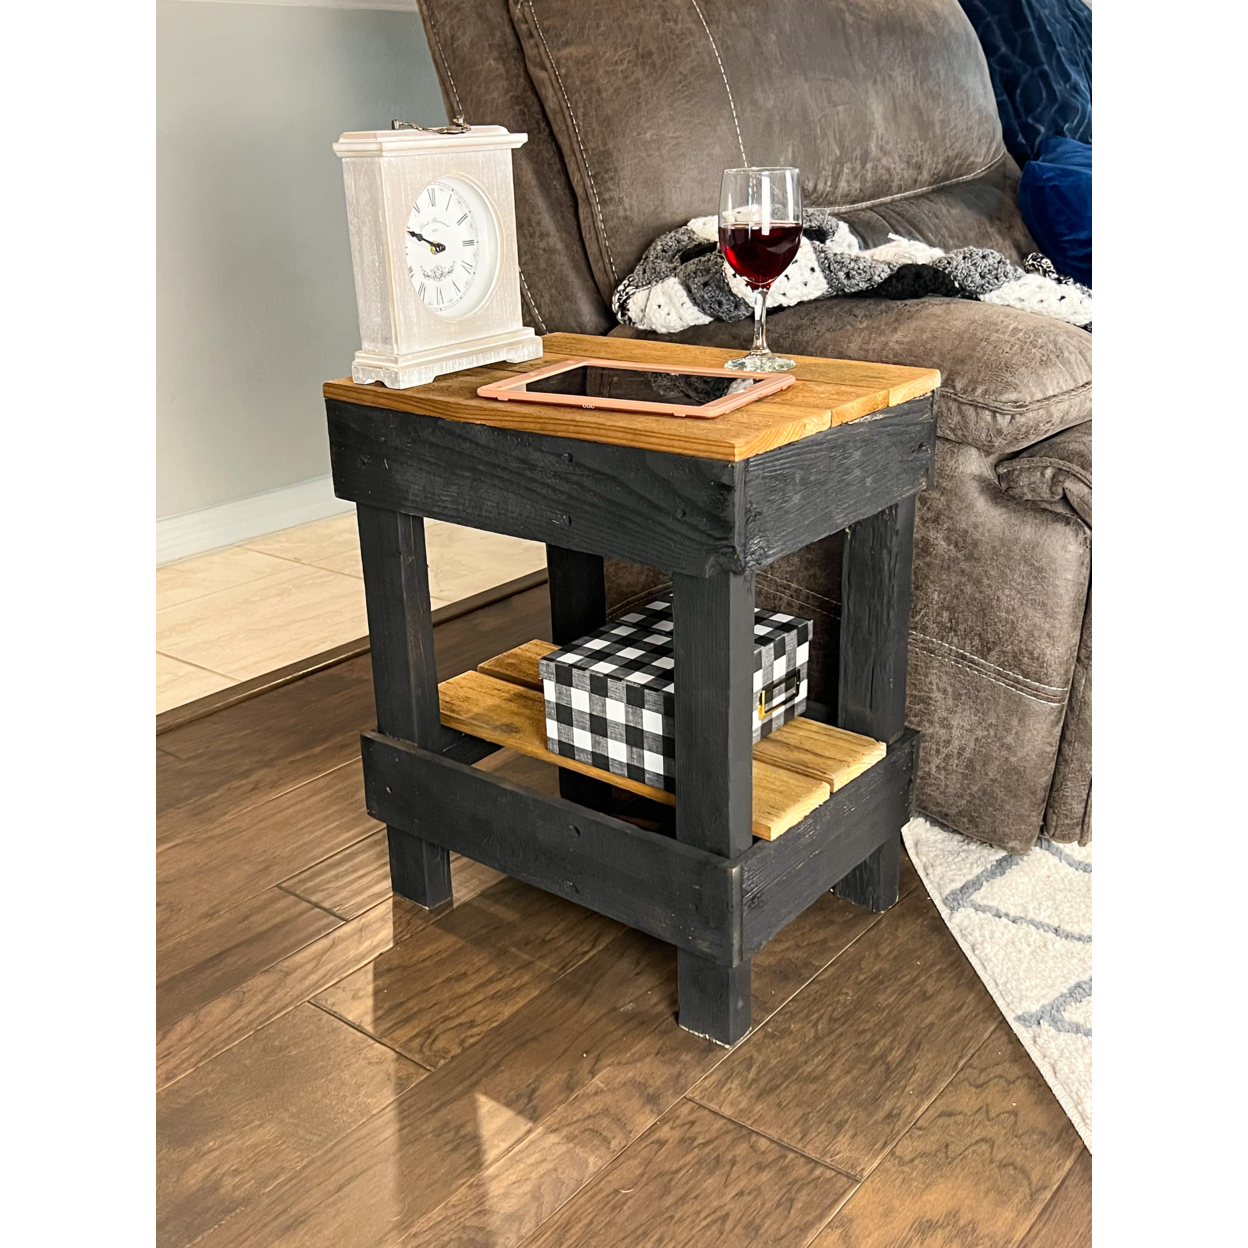 Reclaimed Wood Rustic Bedside or Living Room End Side Table Country Charm Farmhouse Nightstand - Lt Brown/Black